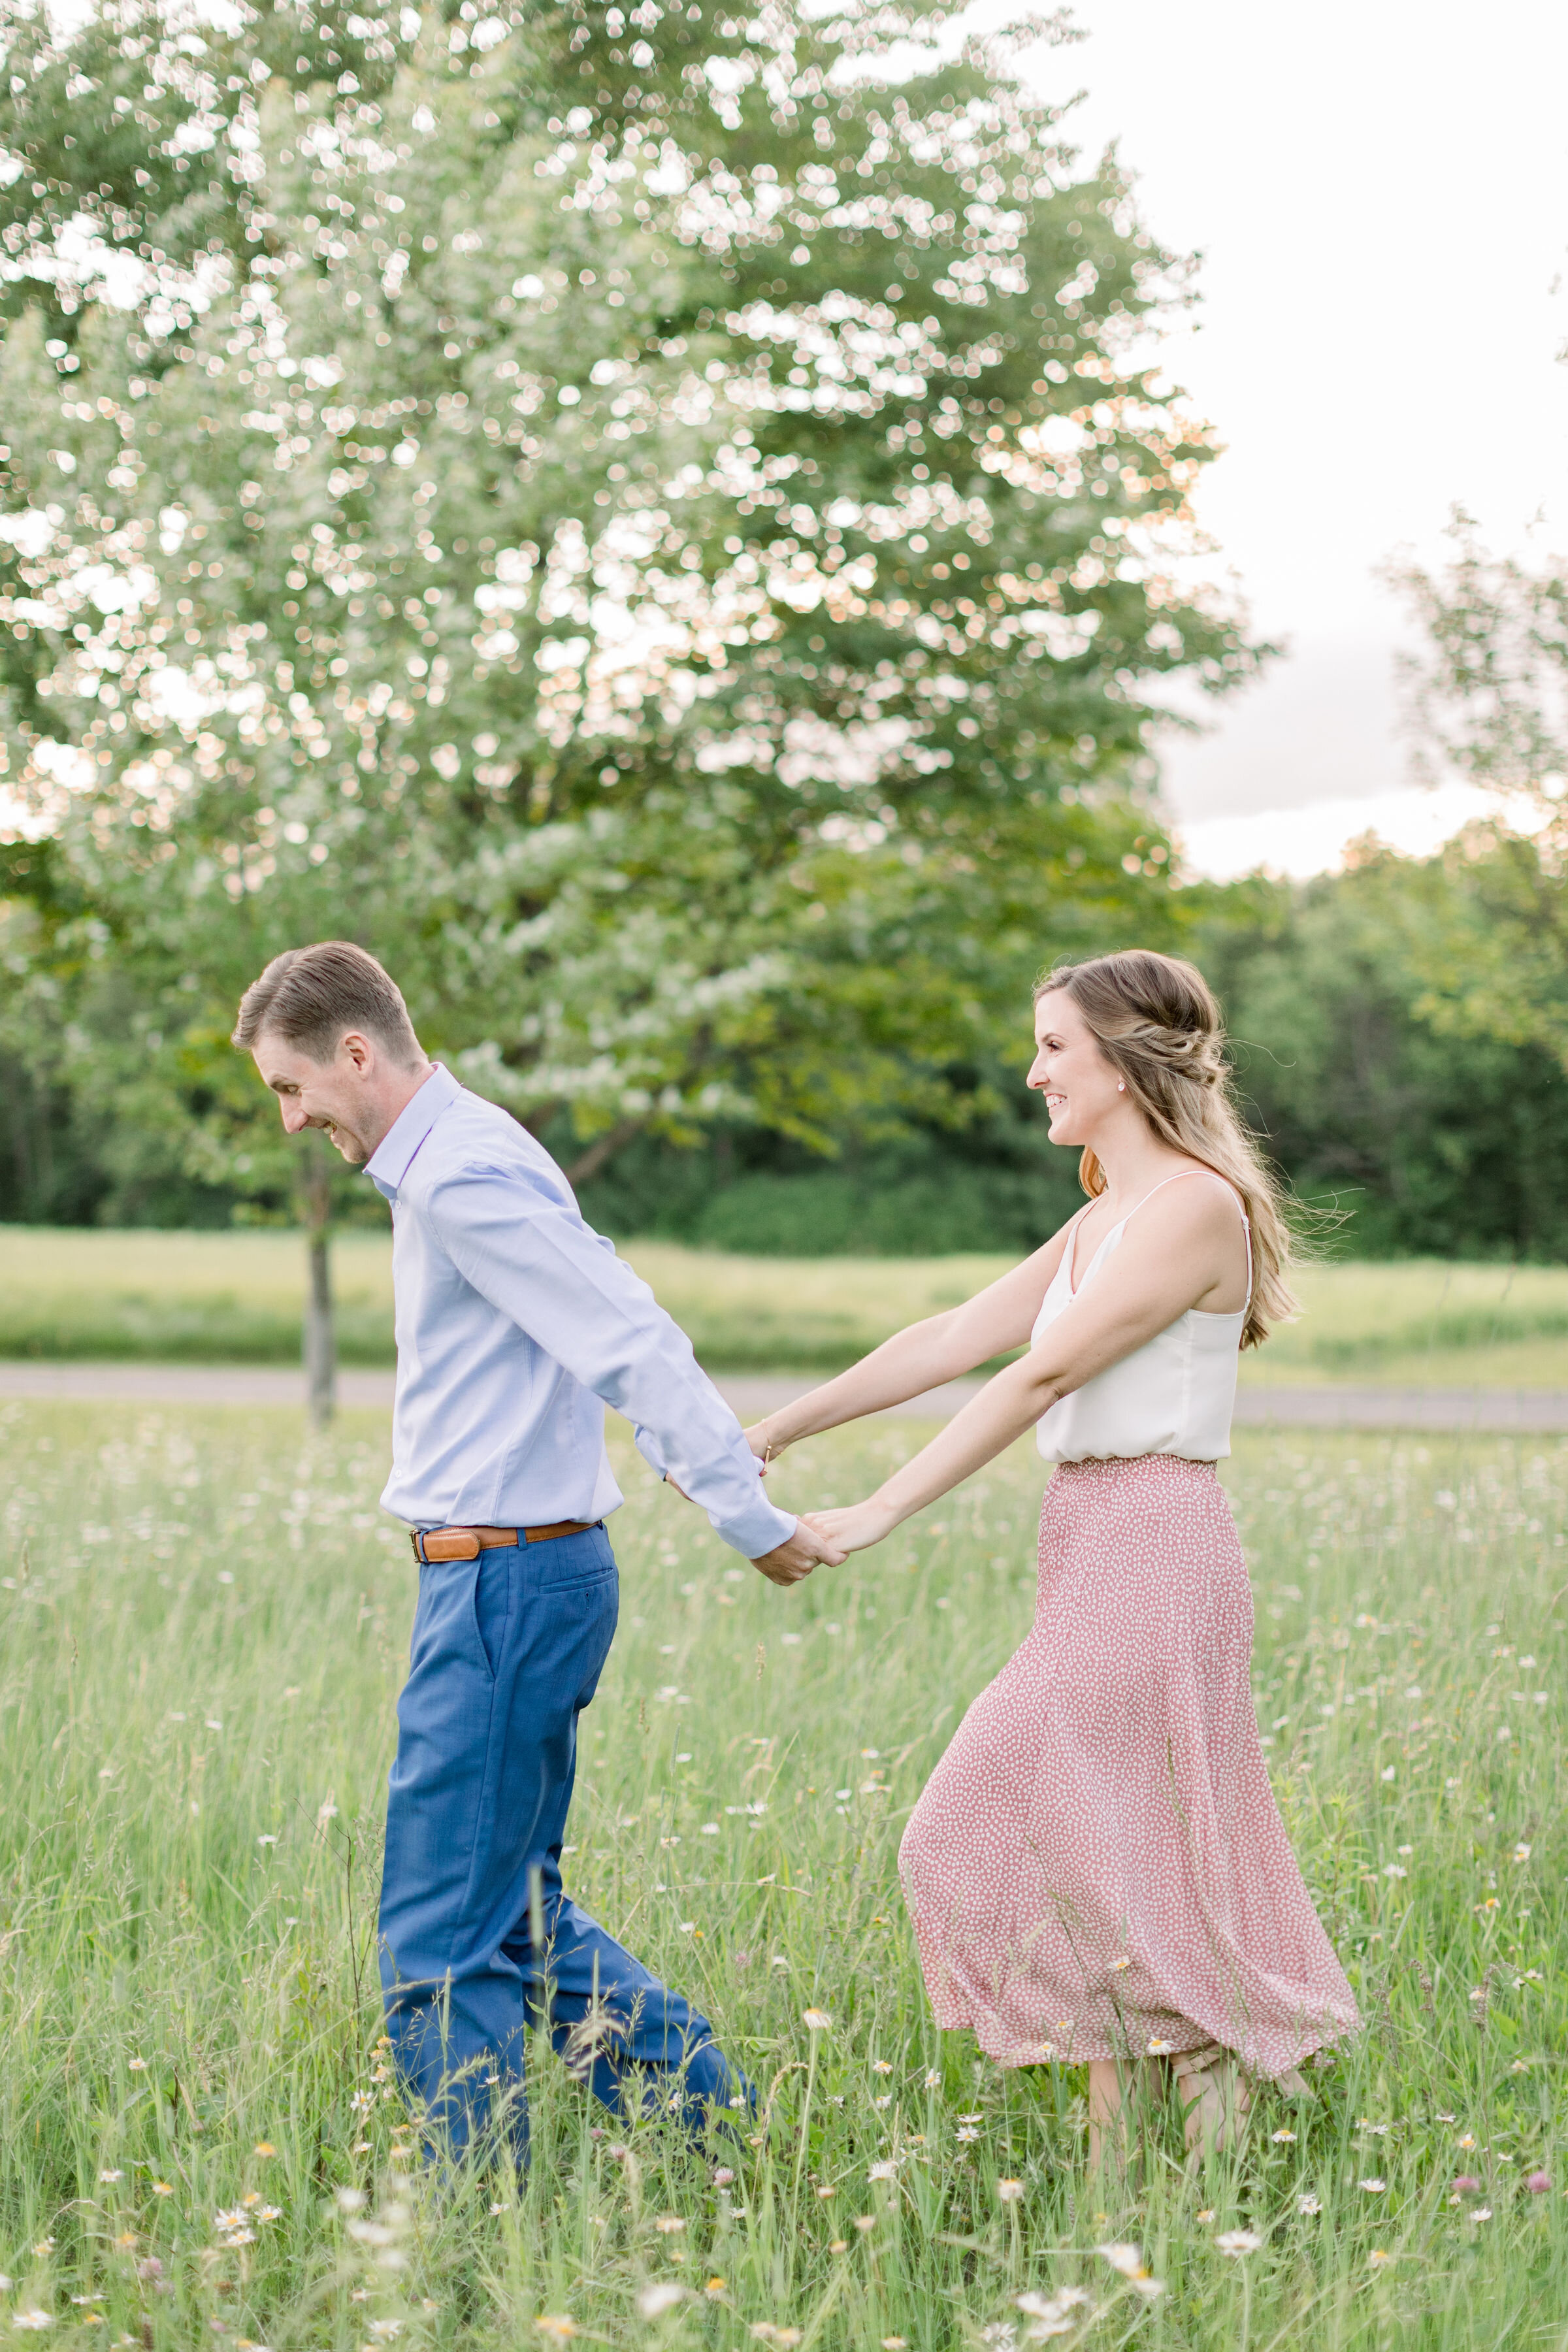  Perfect summer outfits for engagement photoshoot with blush calf-length skirt and white shirt and a blue shirt and pants in Ottawa, ON by Chelsea Mason Photography. pink and blue engagement colors engagement outfits inspo couple outfits summer engag